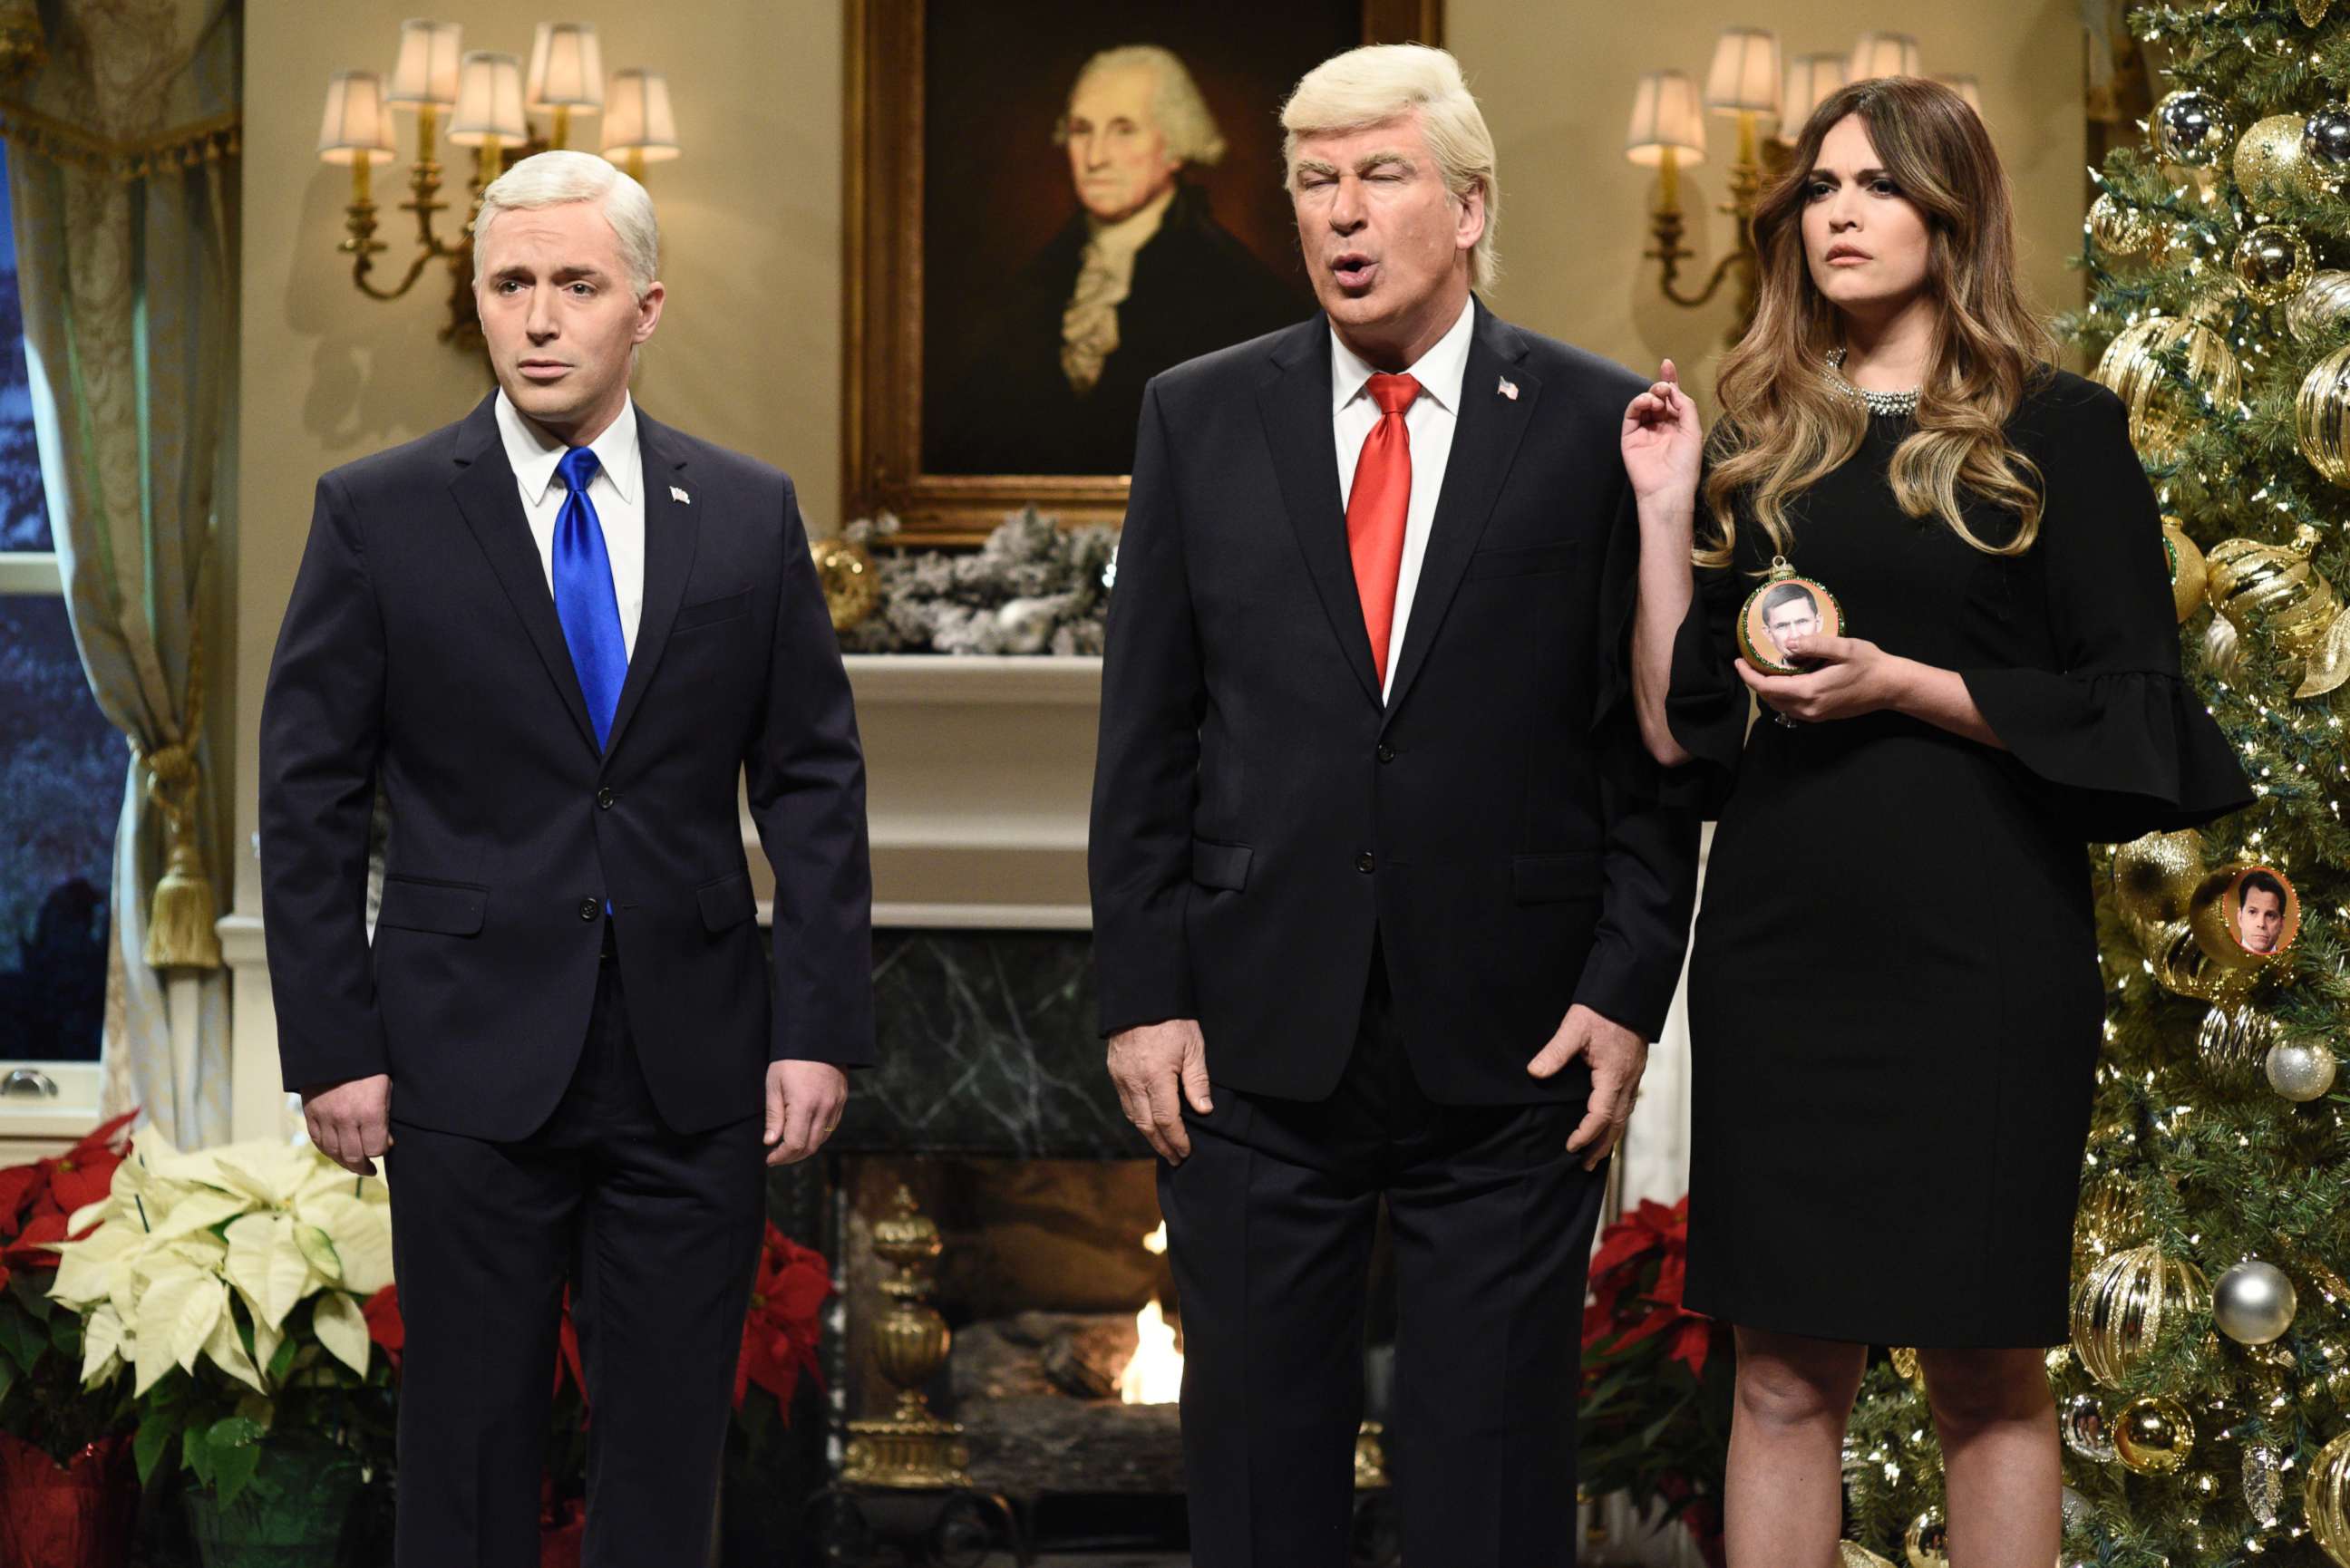 PHOTO: SATURDAY NIGHT LIVE -- Episode 1734 -- Pictured: (l-r) Beck Bennett as Vice President Mike Pence, Alec Baldwin as President Donald J. Trump, Cecily Strong as First Lady Melania Trump during "White House Tree Trimming Cold Open" on Dec. 16, 2017.